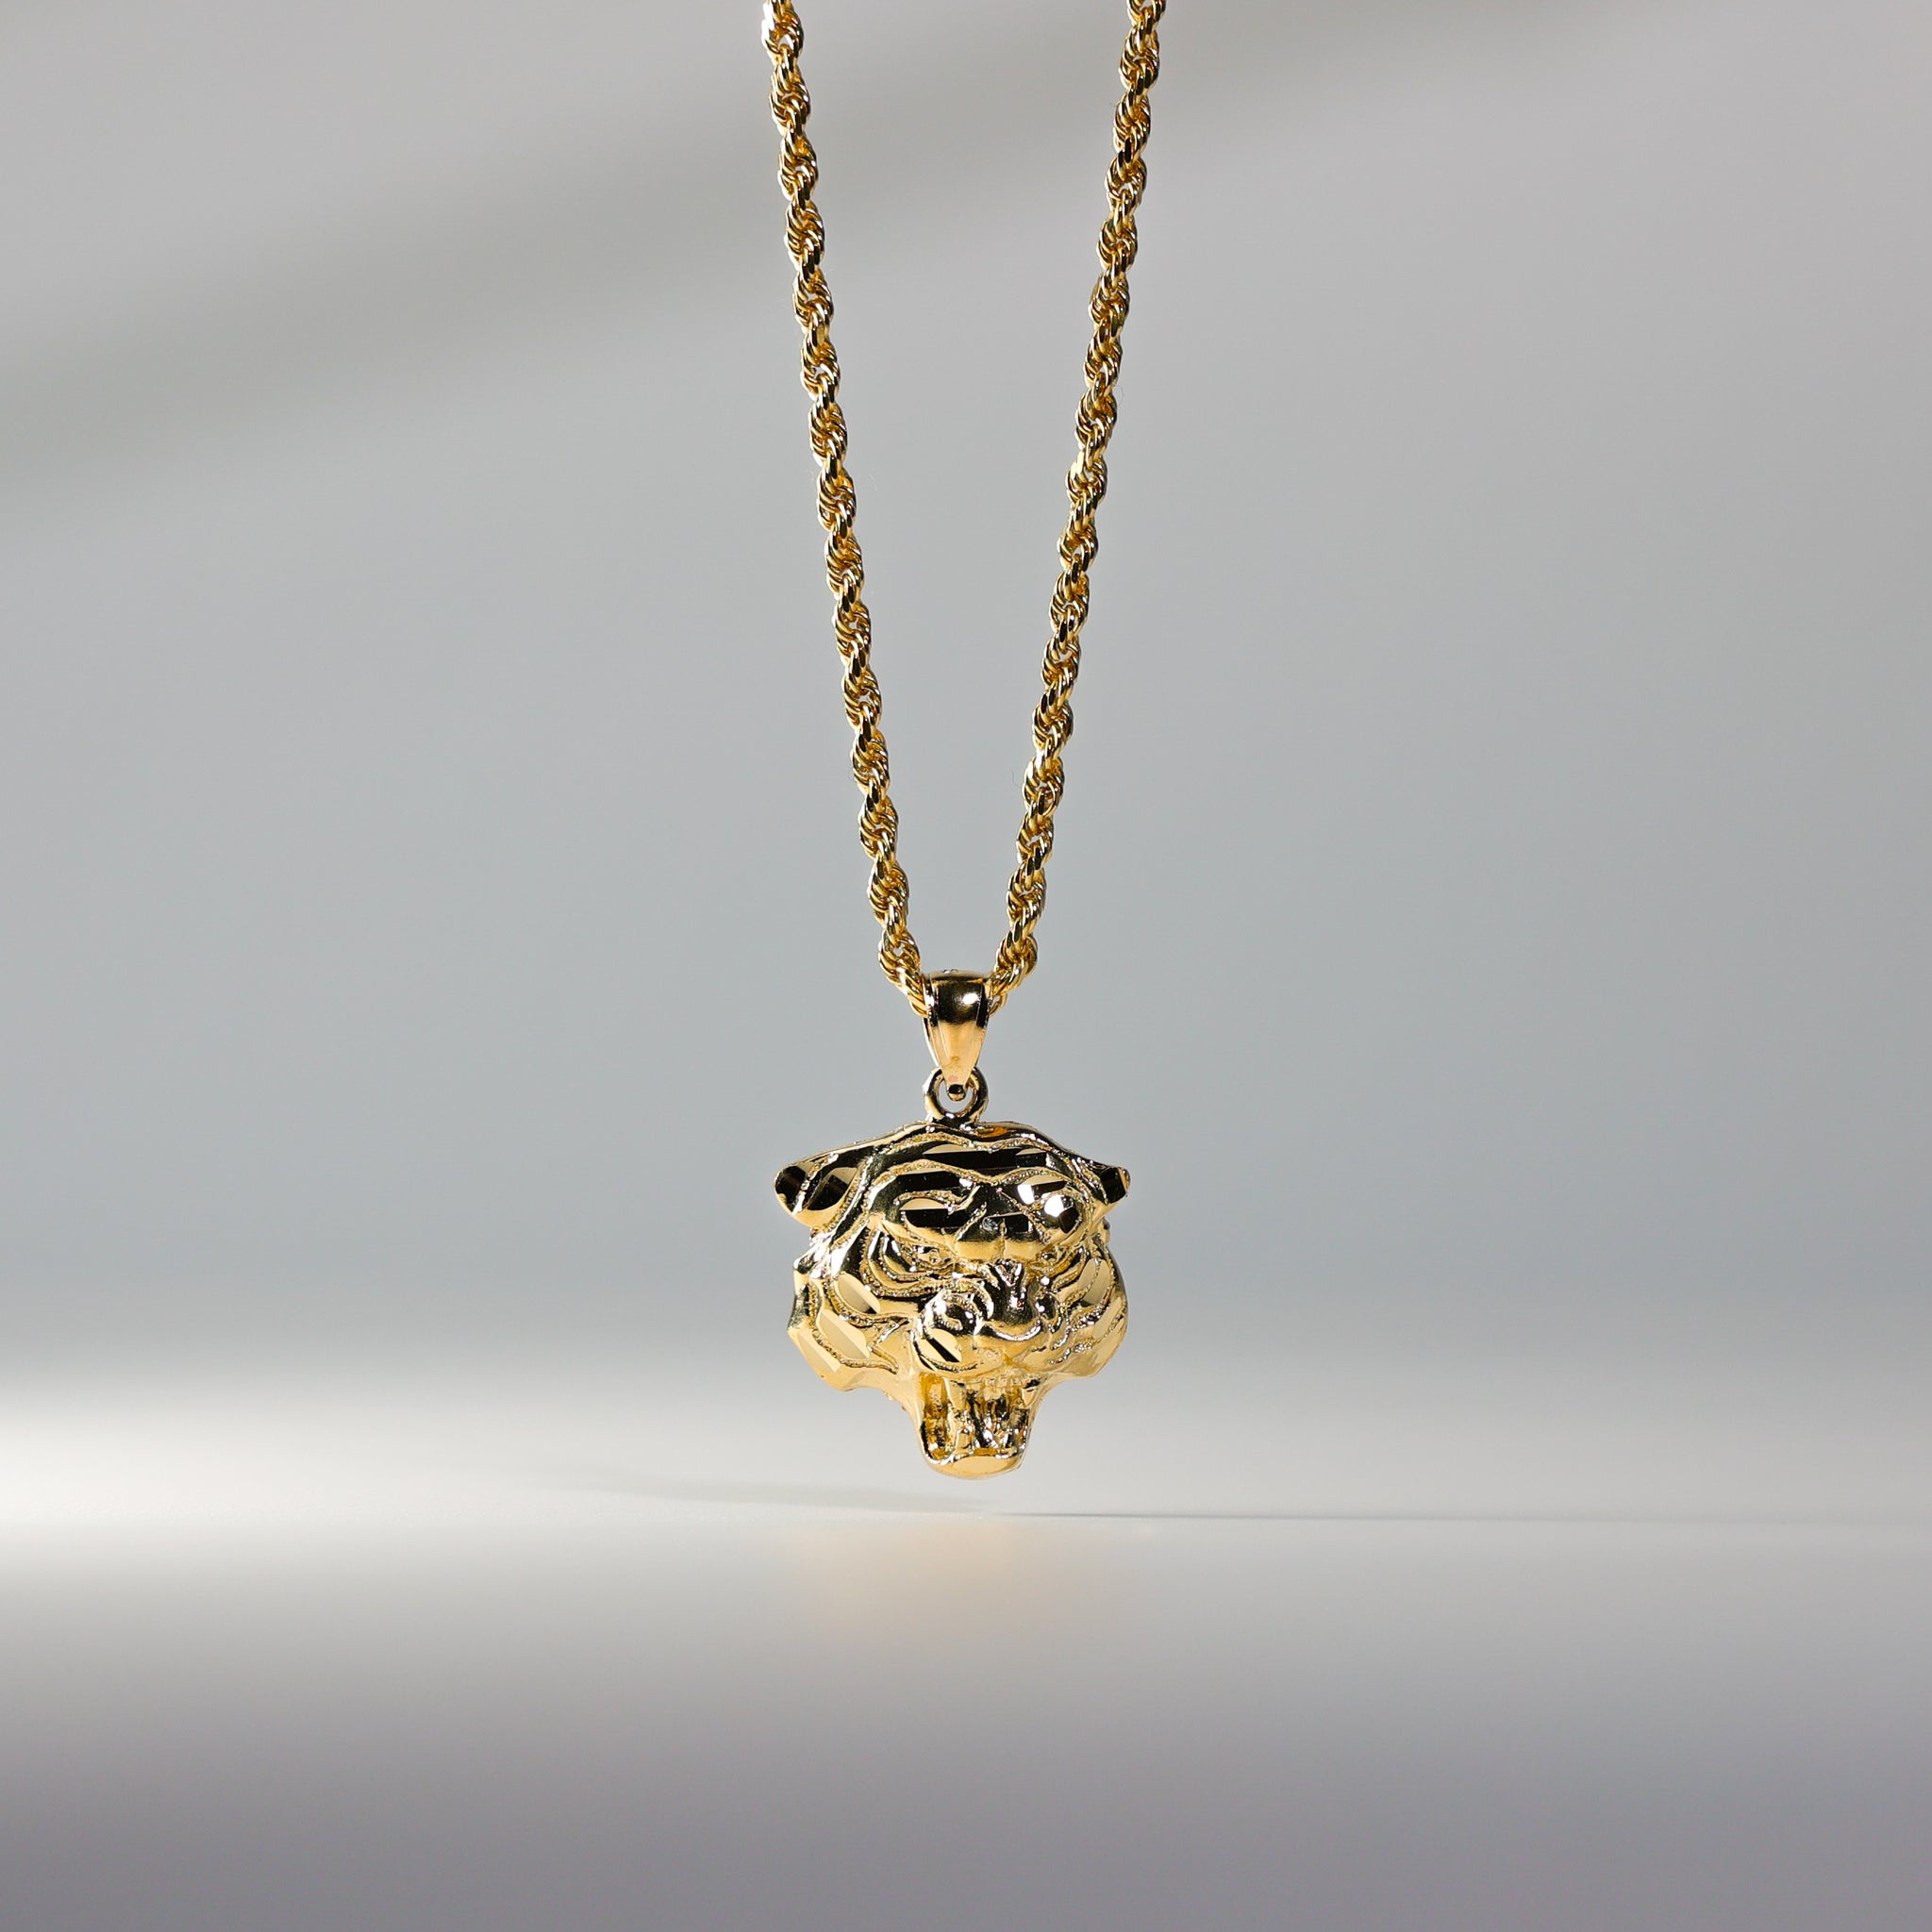 TIGER PENDANT - Behold the EPIC Solid Gold Tiger Pendant by Proclamation  Jewelry on a d/c Franco - YouTube